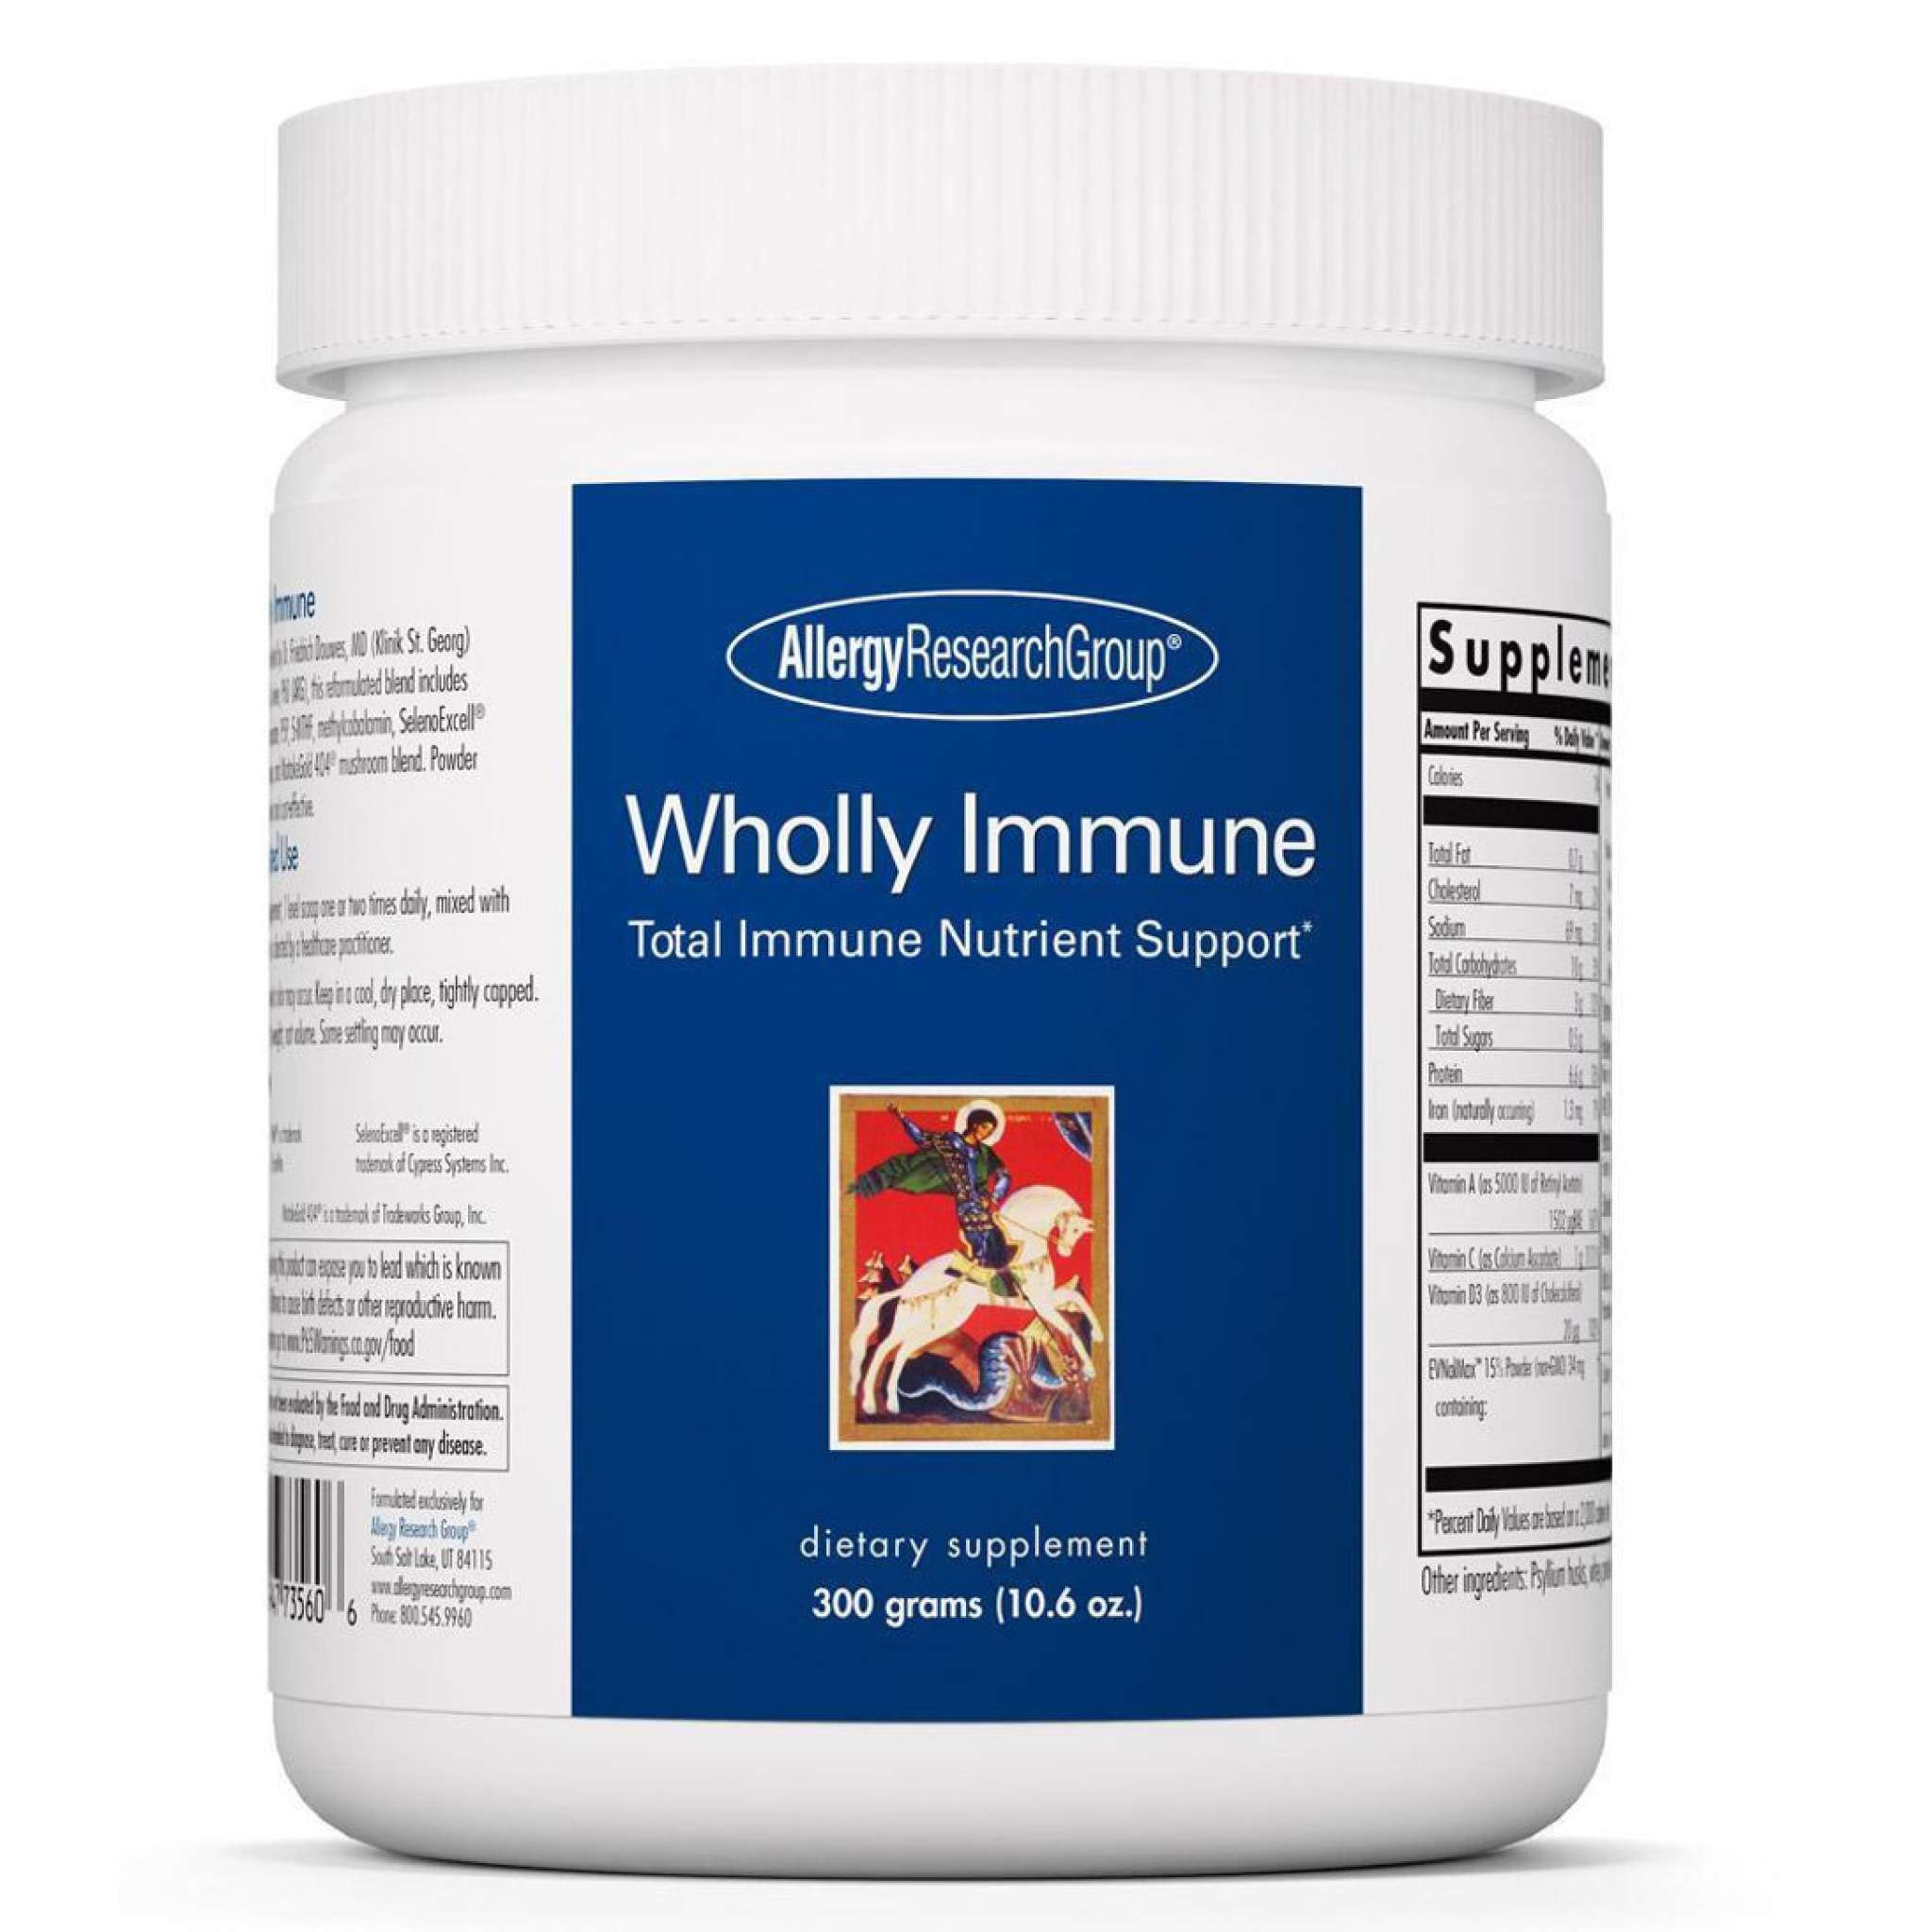 Allergy Research Group - Wholly Immune 300gms powder